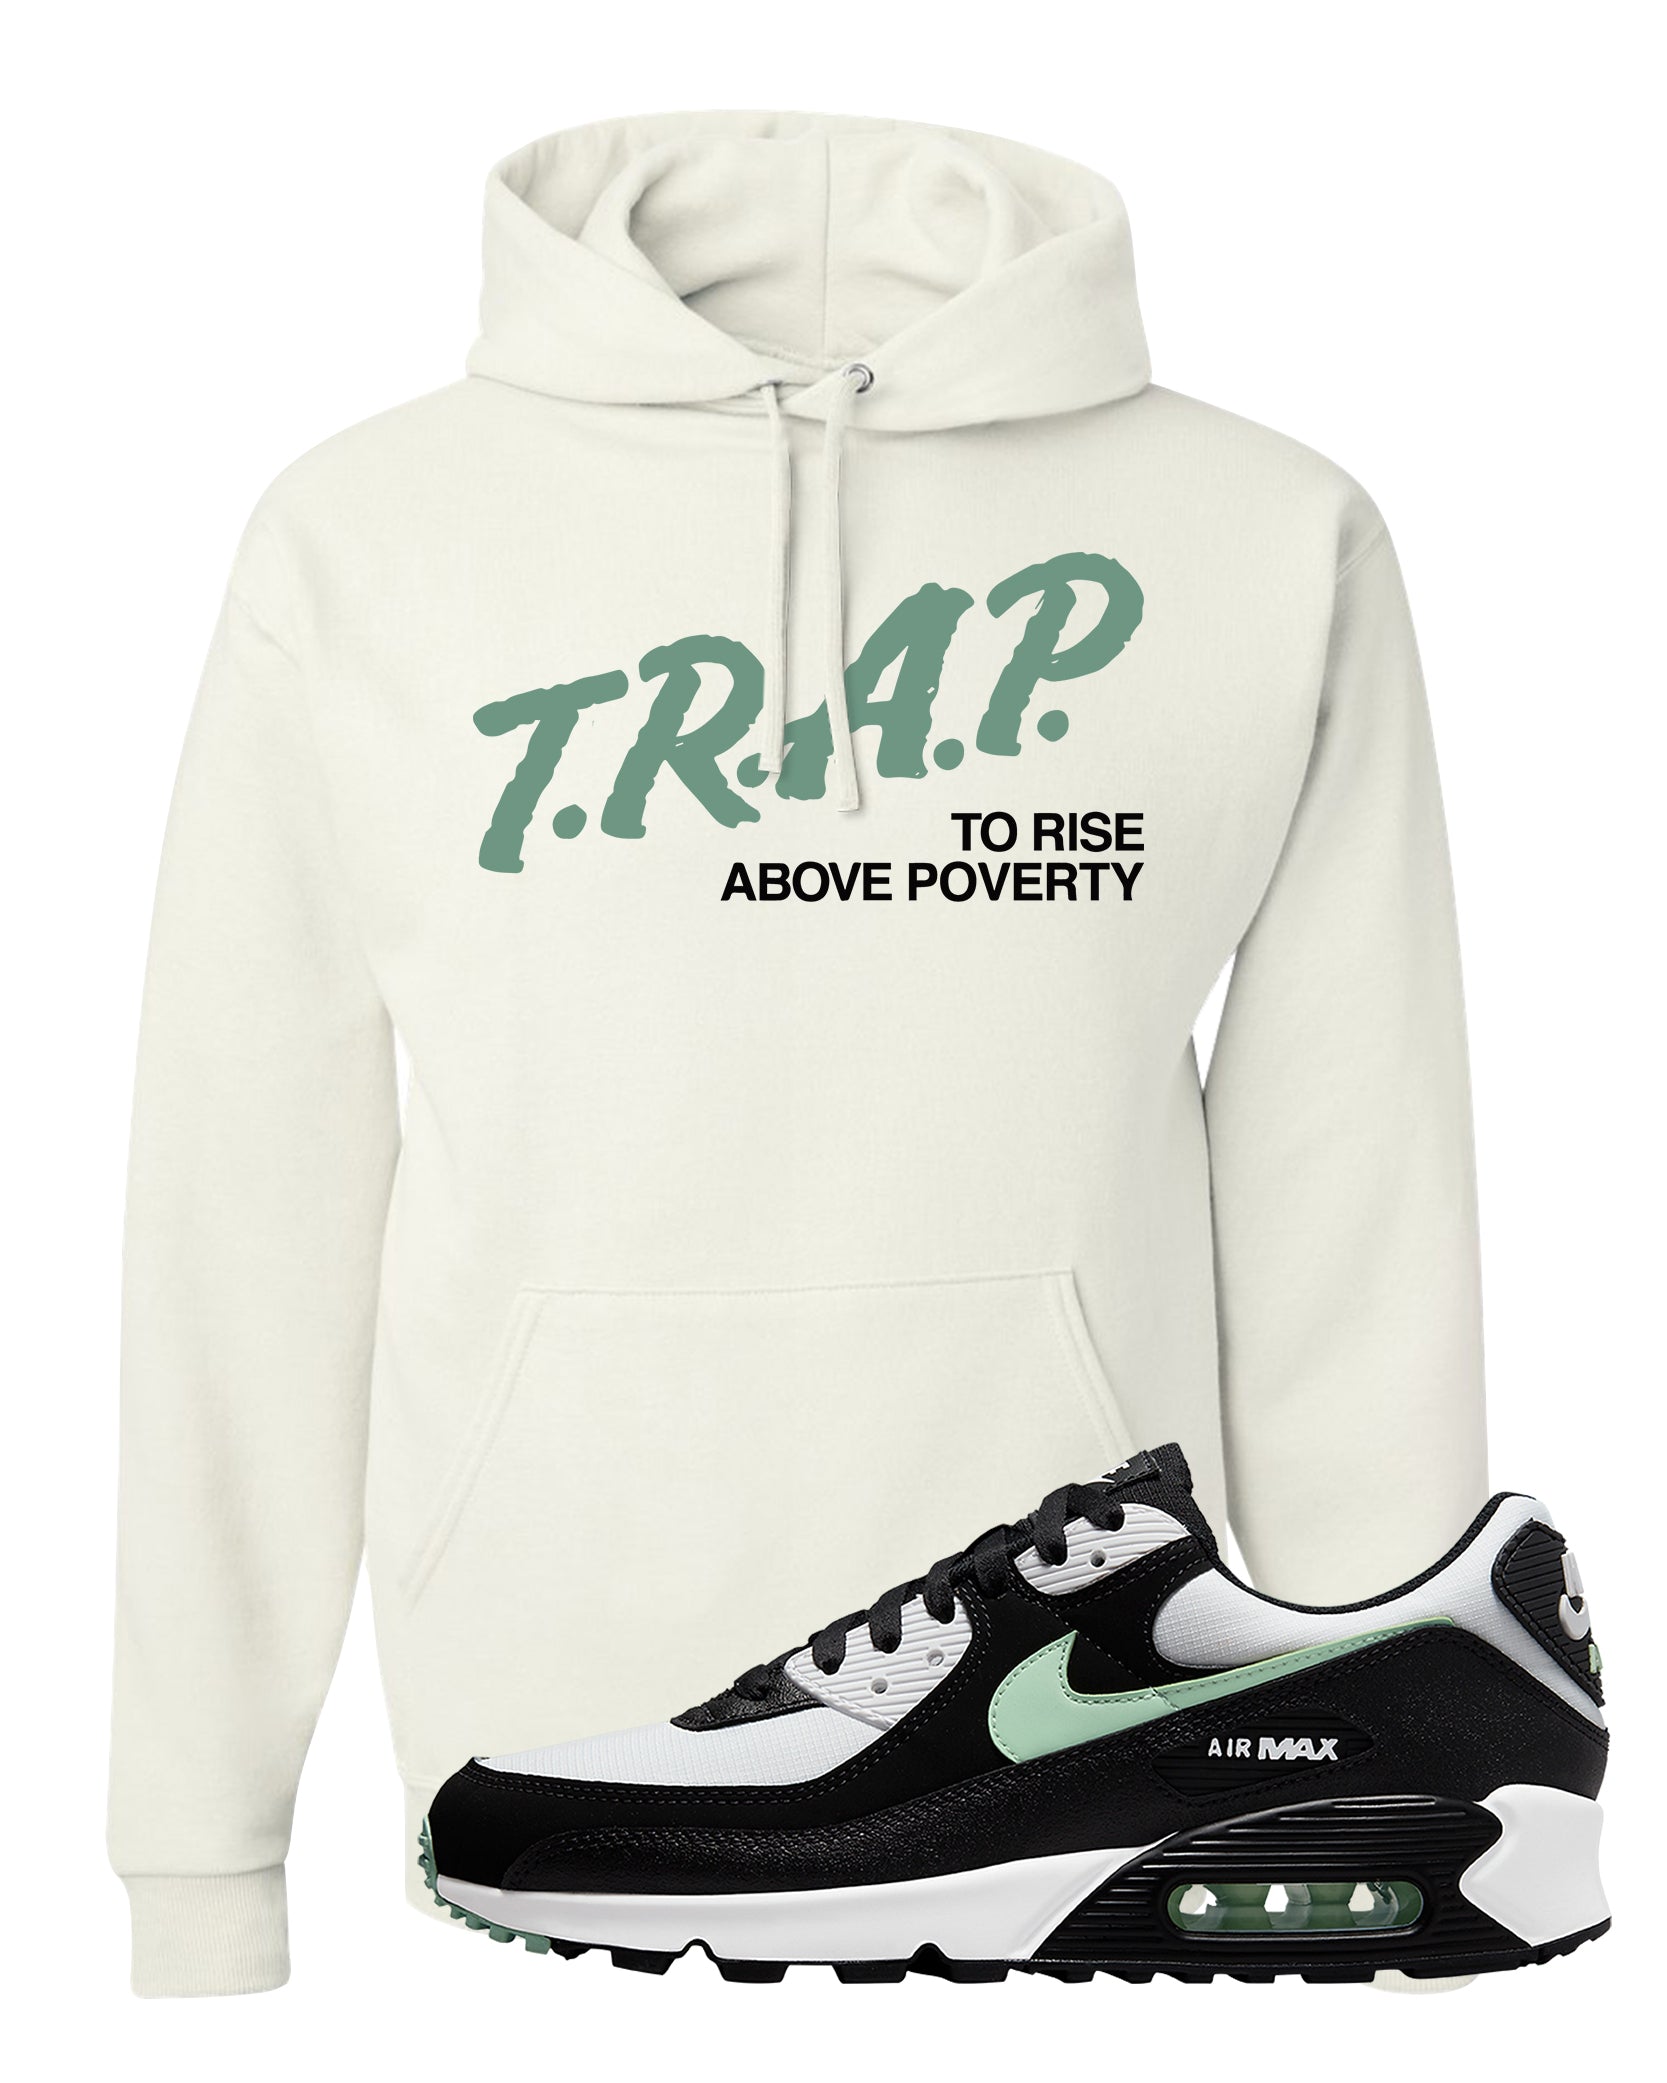 Black Mint 90s Hoodie | Trap To Rise Above Poverty, White